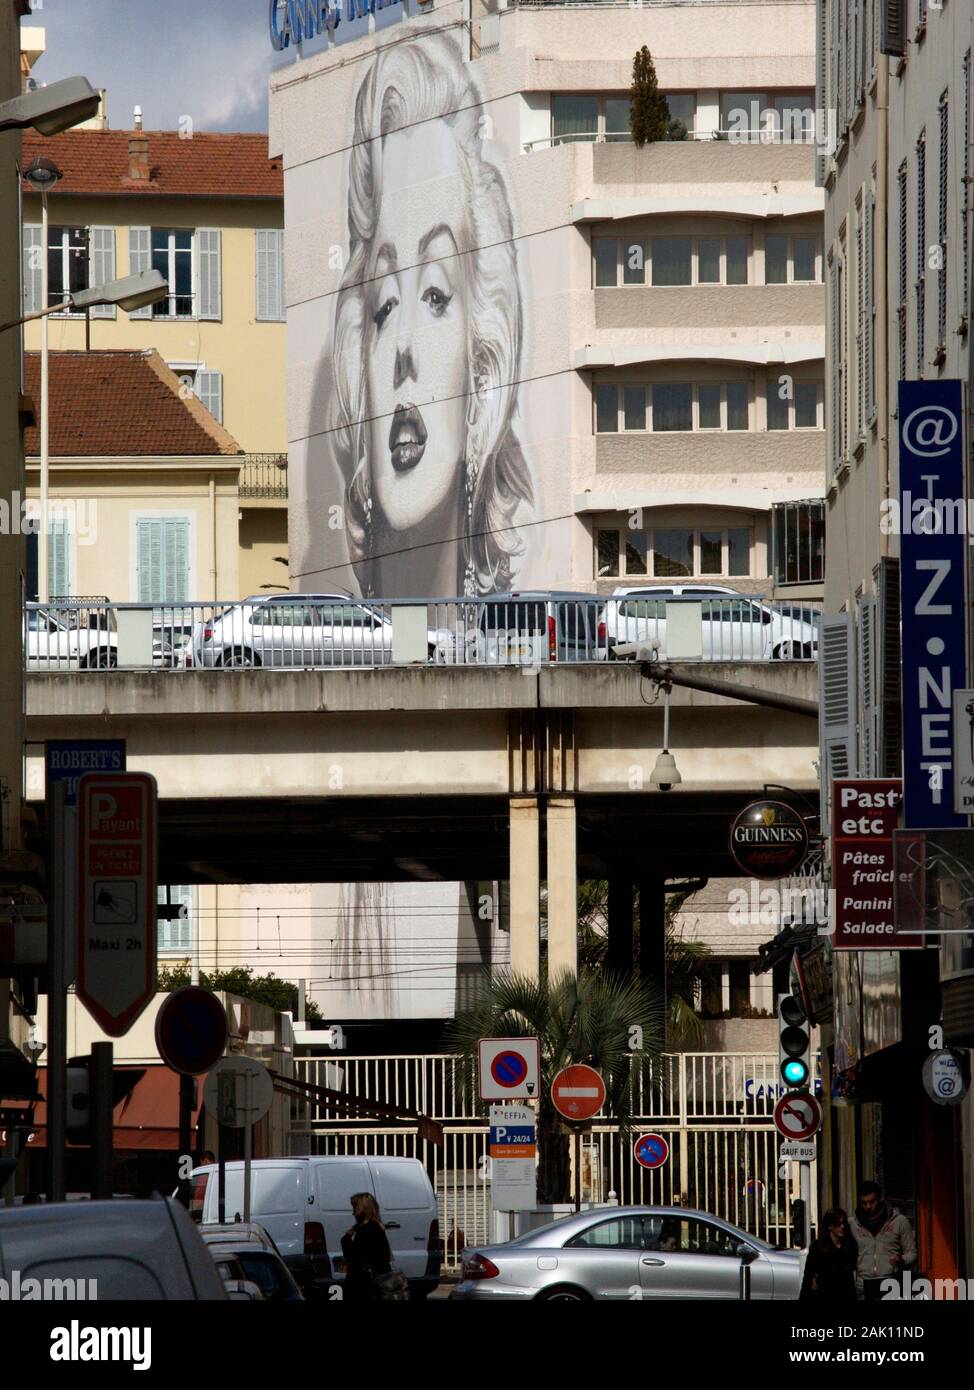 CANNES FRANCE - STREET VIEW NEAR CANNES TRAIN STATION WITH A LARGE WALL FRESCO OF MARYLIN MONROE ON A BUILDING FACADE - CANNES STREET - CANNES STREET ART © Frédéric BEAUMONT Stock Photo